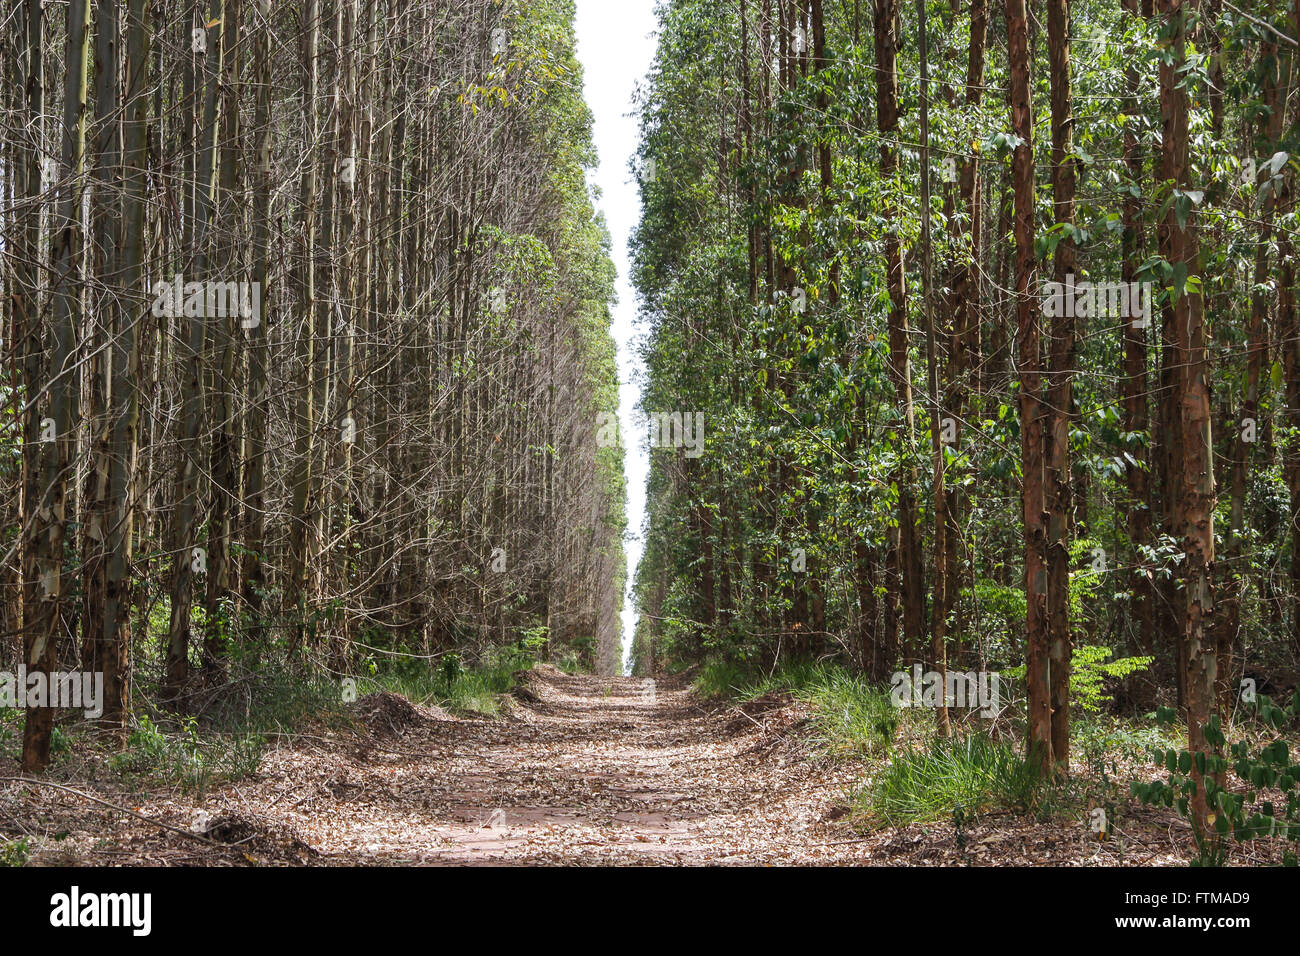 Track bordered by eucalyptus forest Stock Photo